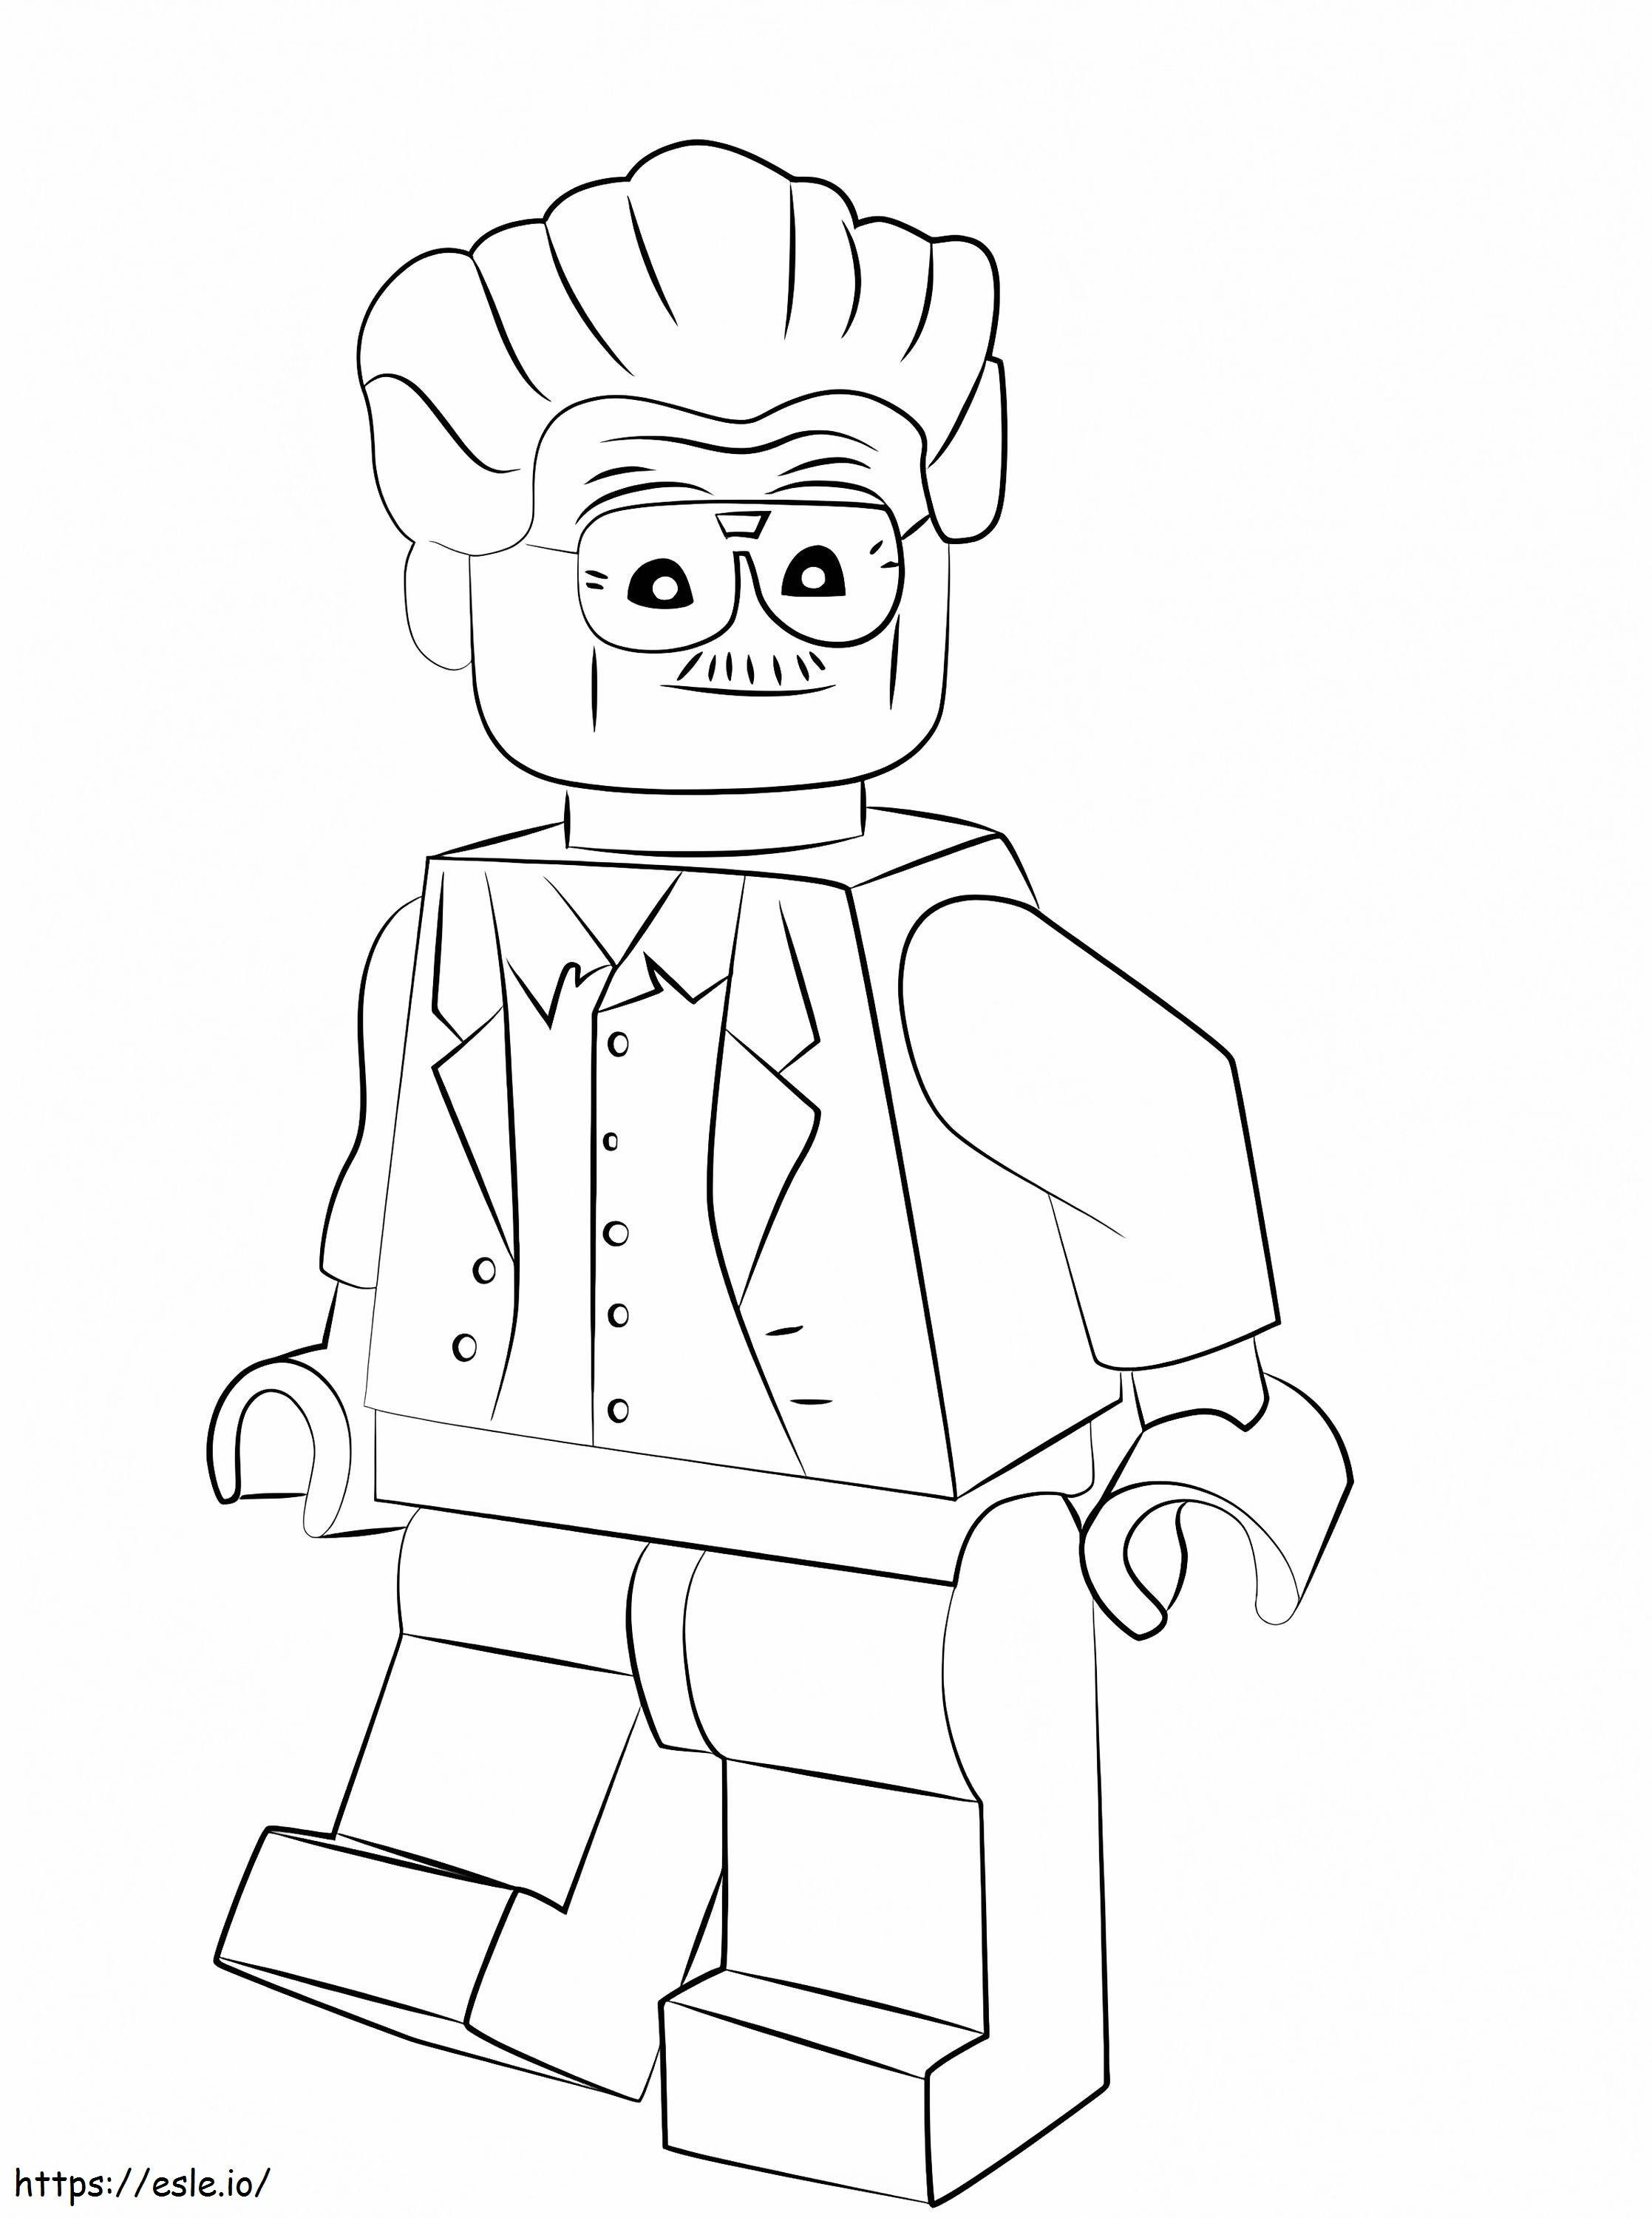 Old Lego Stan Lee coloring page